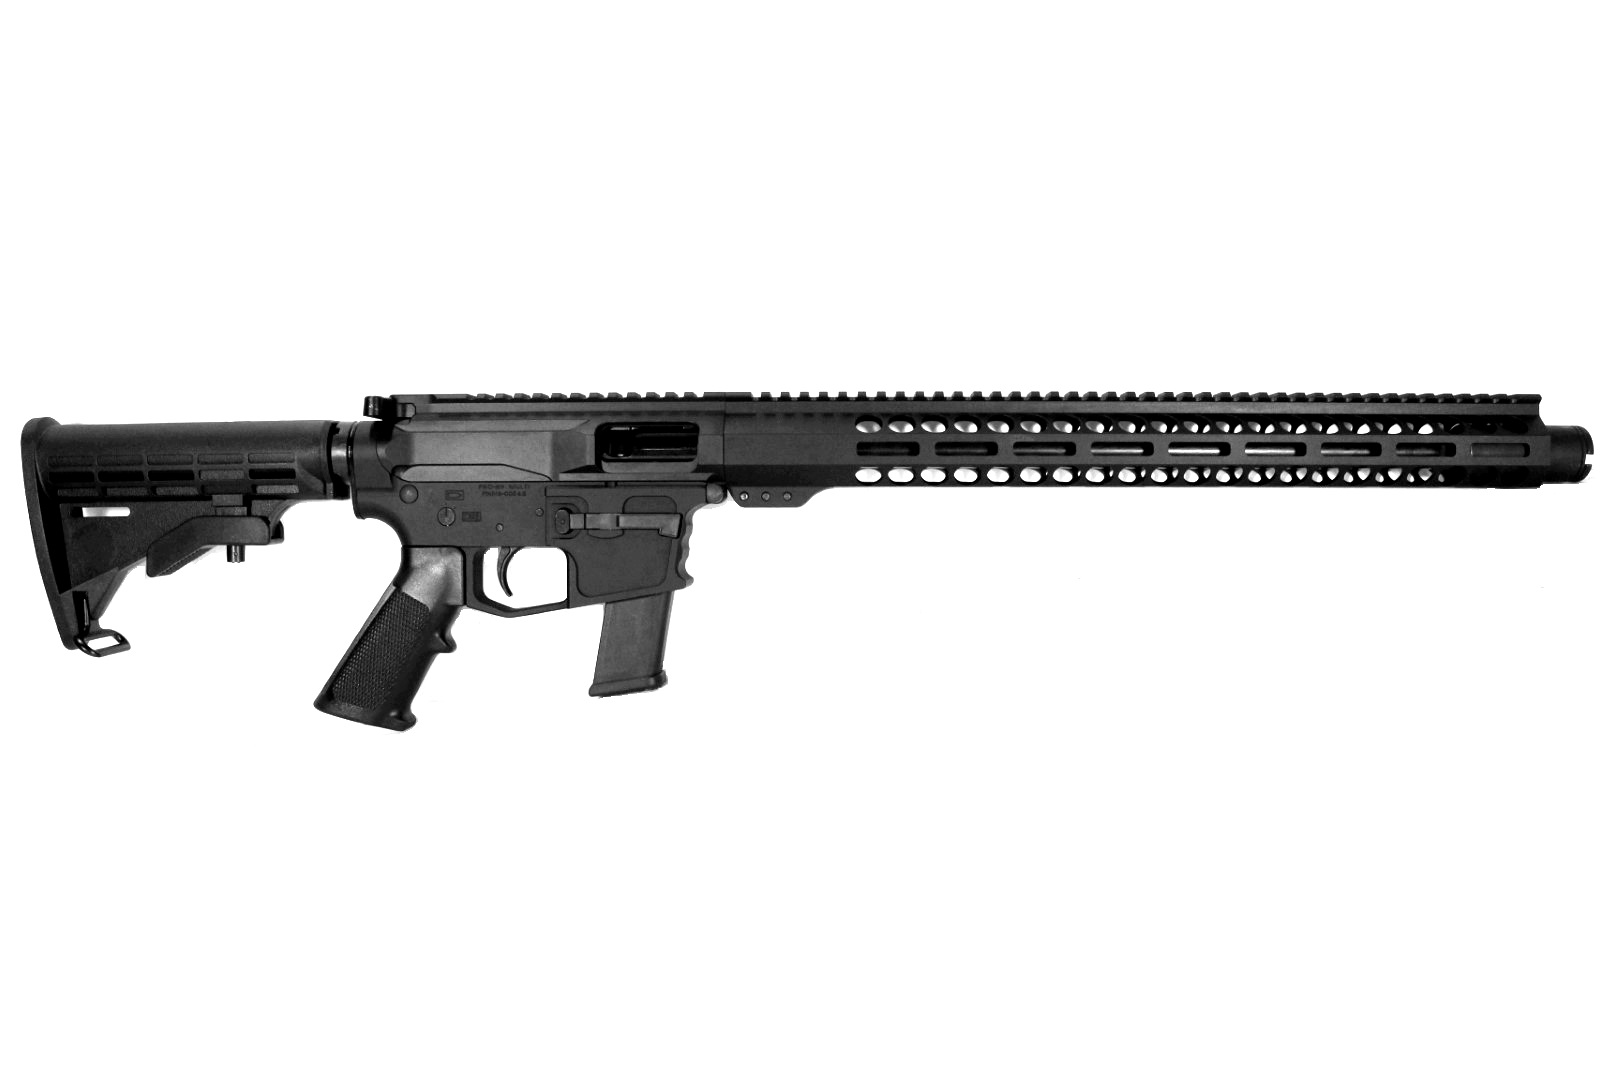 16 inch 45 ACP AR45 Rifle | Milspec or Better | USA MADE